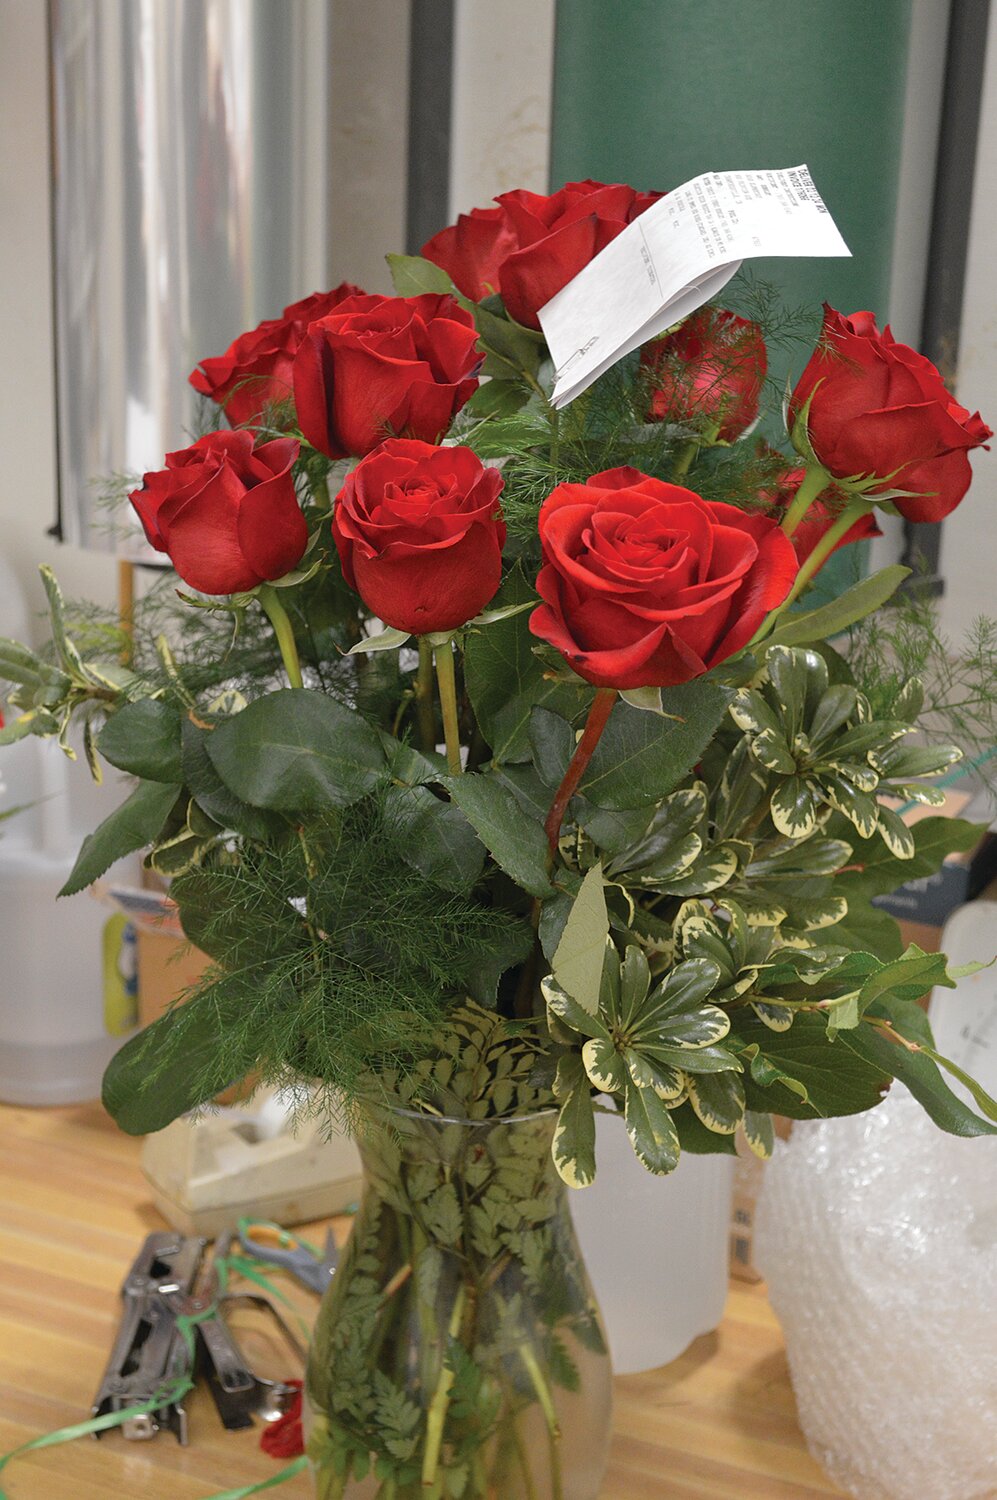 It is estimated that more than 250 million roses are produced for Valentine’s Day.